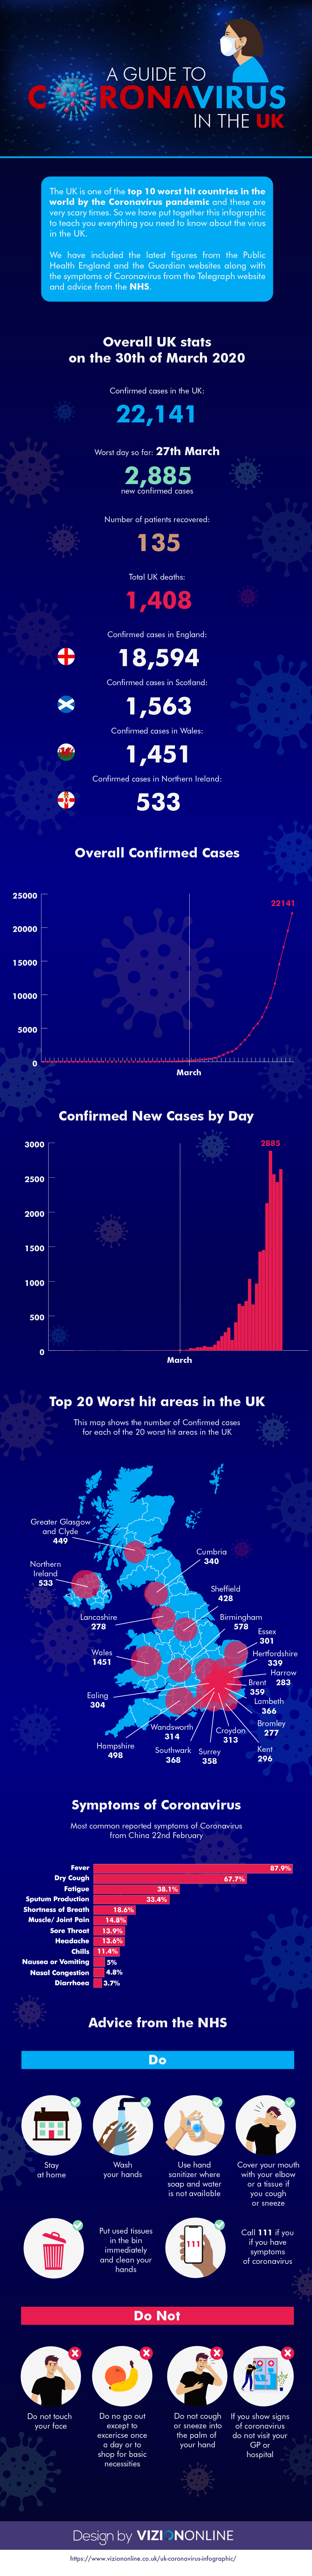 A Guide to Coronavirus in the UK